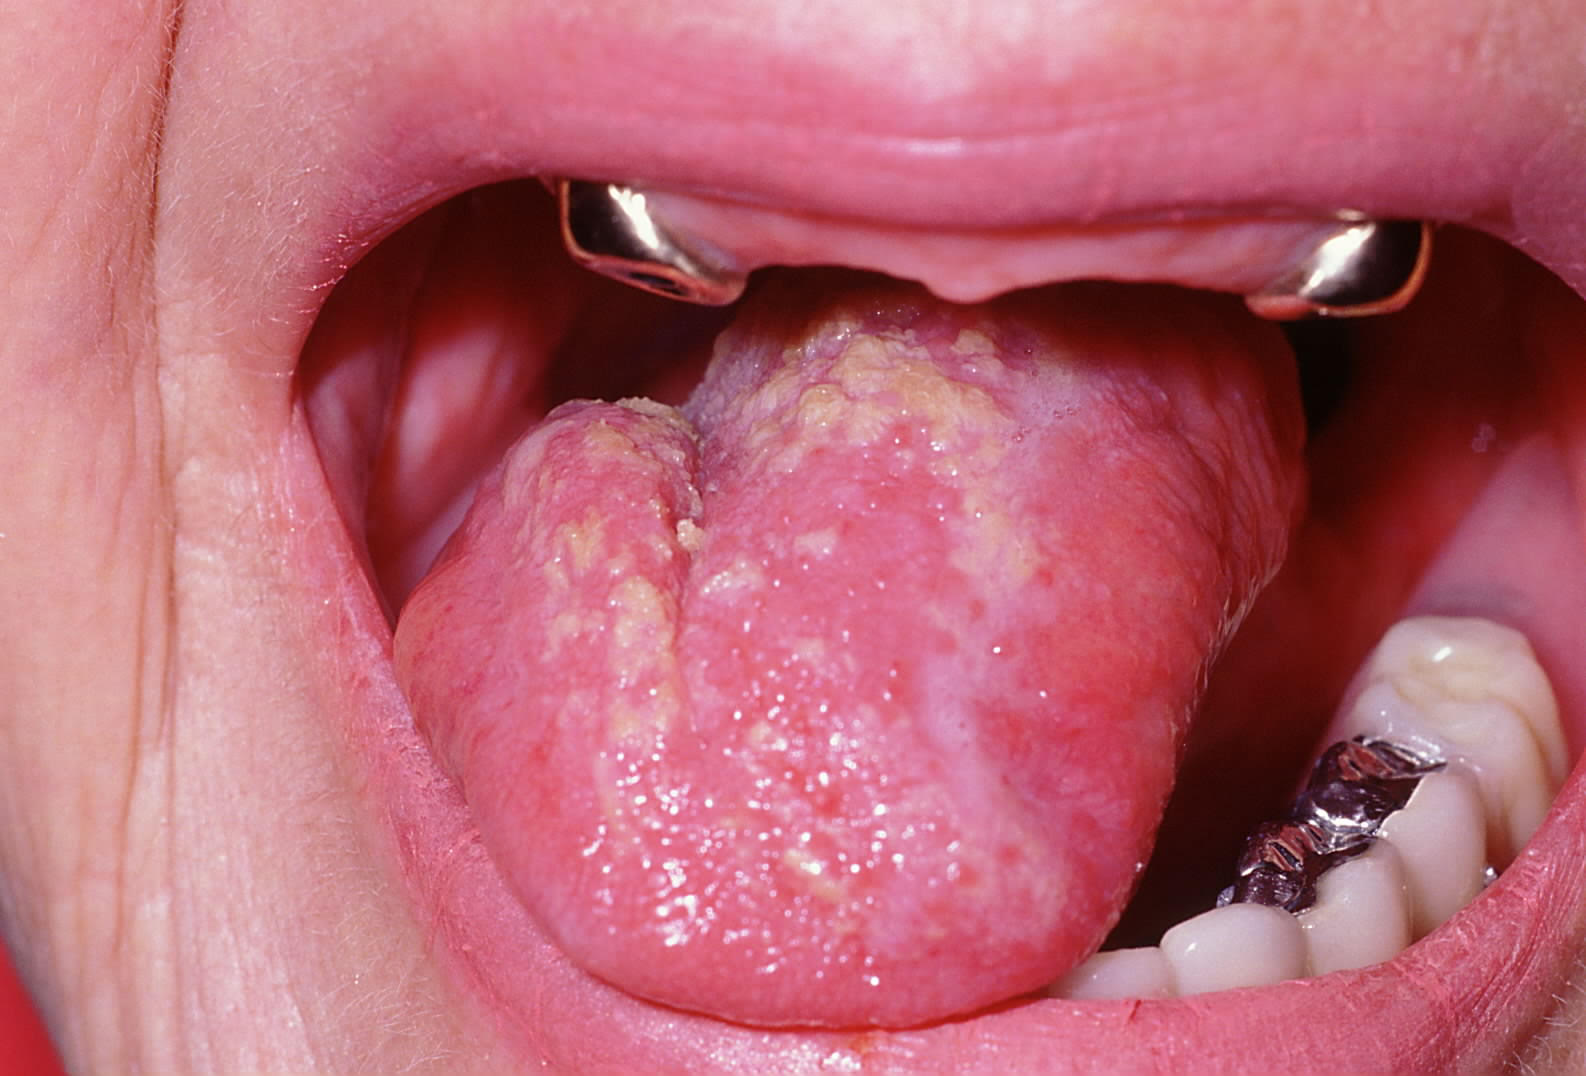 Candida albicans fungal infection on the dorsal surface of the tongue